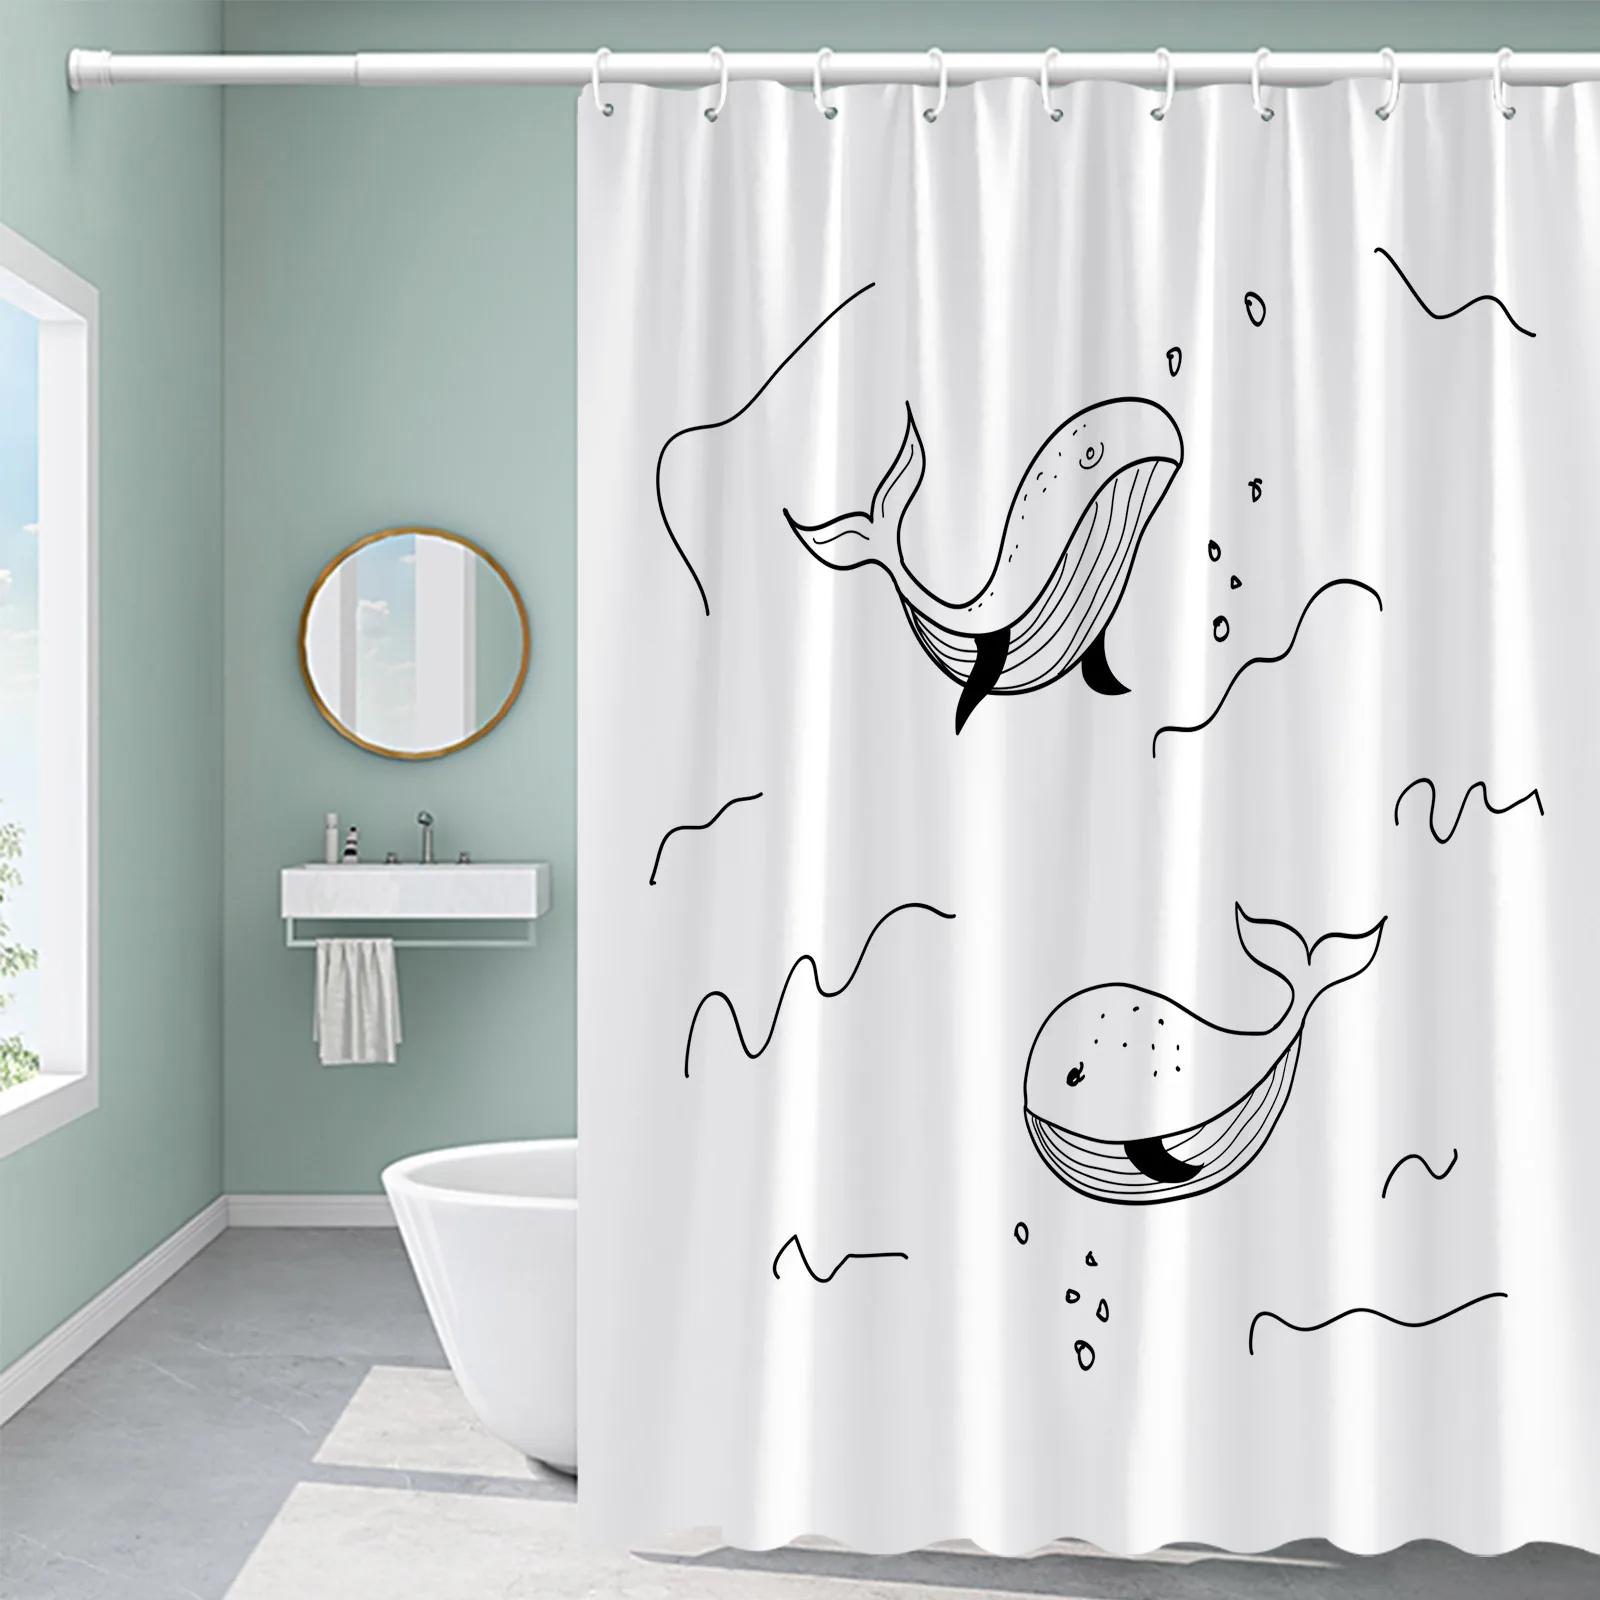 Happy Valentine Shower Curtain Modern Simple Polyester Fabric Decor Bathroom Curtain With Hooks Bathroom Accessories Set images - 6